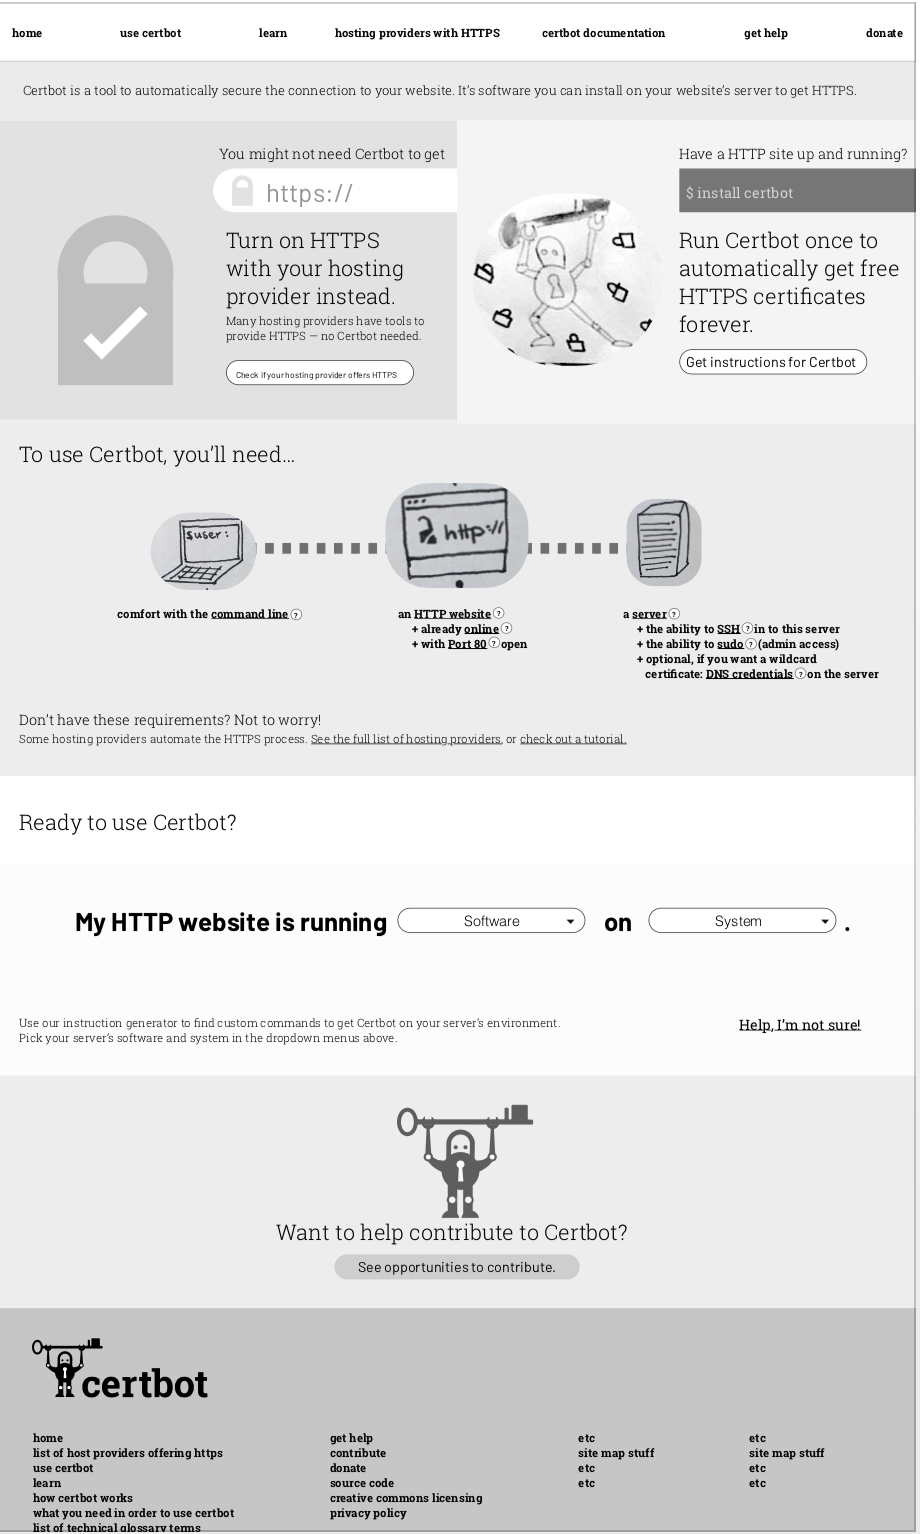 a grayscale mockup of the certbot website and rough illustrations.